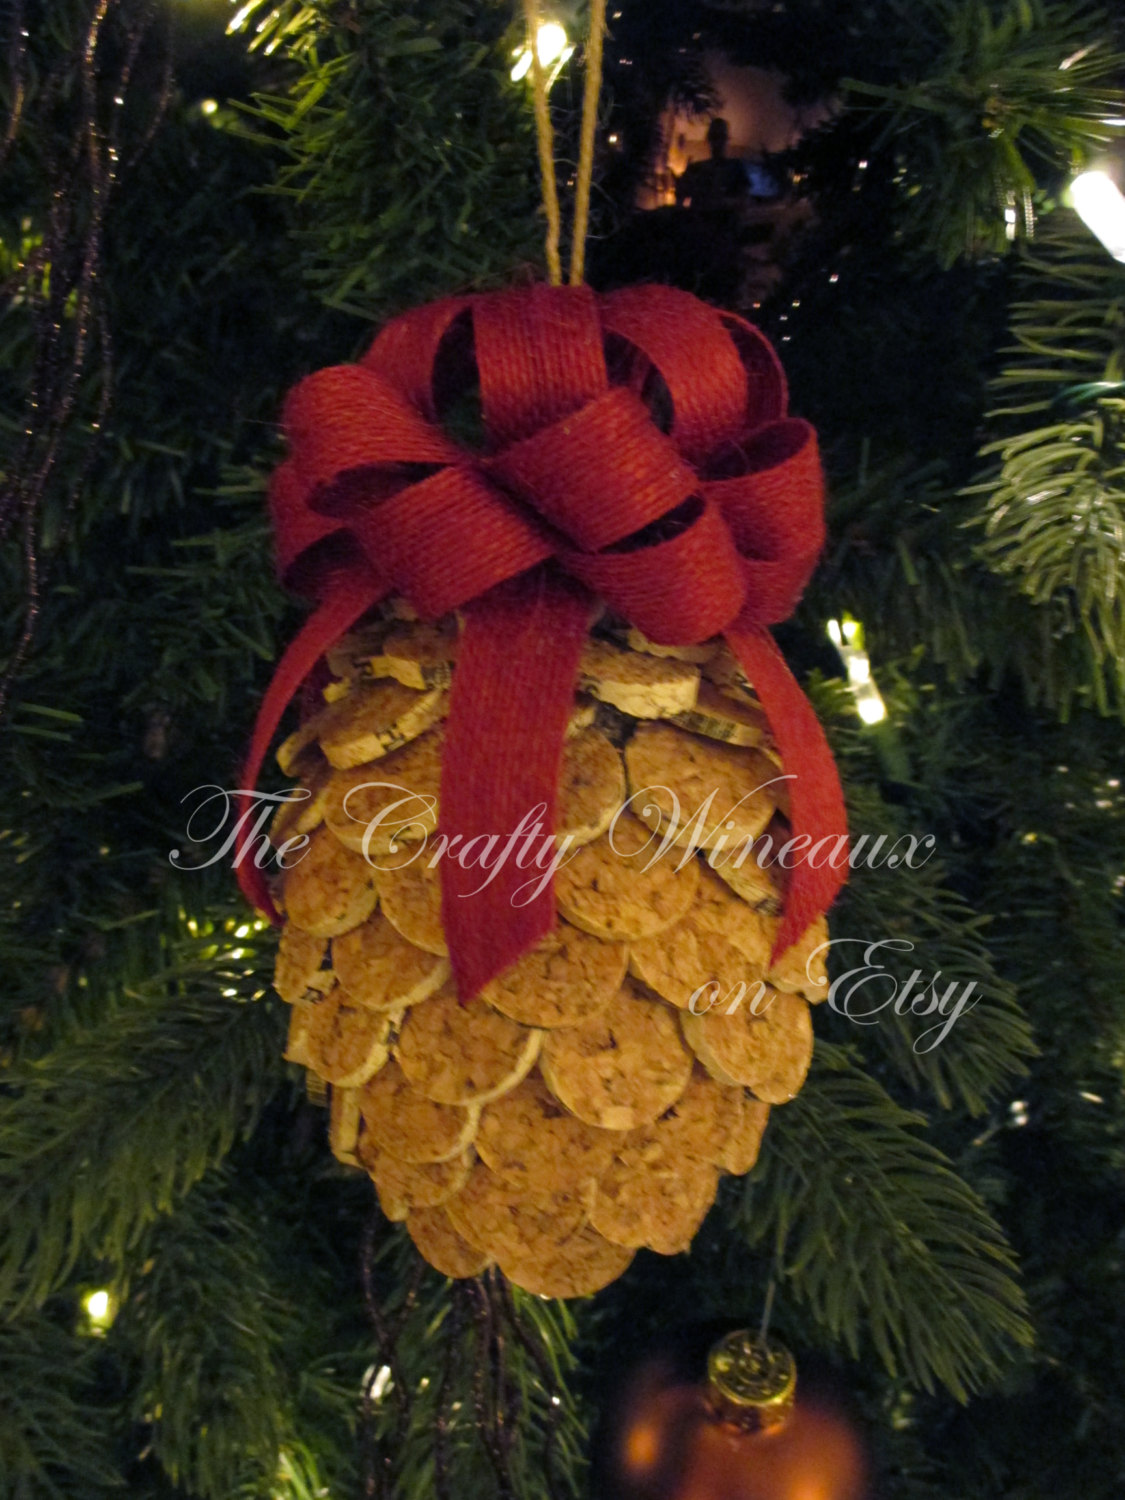 https://thecraftywineaux.com/wp-content/uploads/2019/11/free-shipping-poinsettia-red-bow-wine-cork-pine-cone-christmas-ornament-pineapple-ornaments-100-recycled-wine-corks-twine-burlap-ribbon-5dcd9bf3.jpg